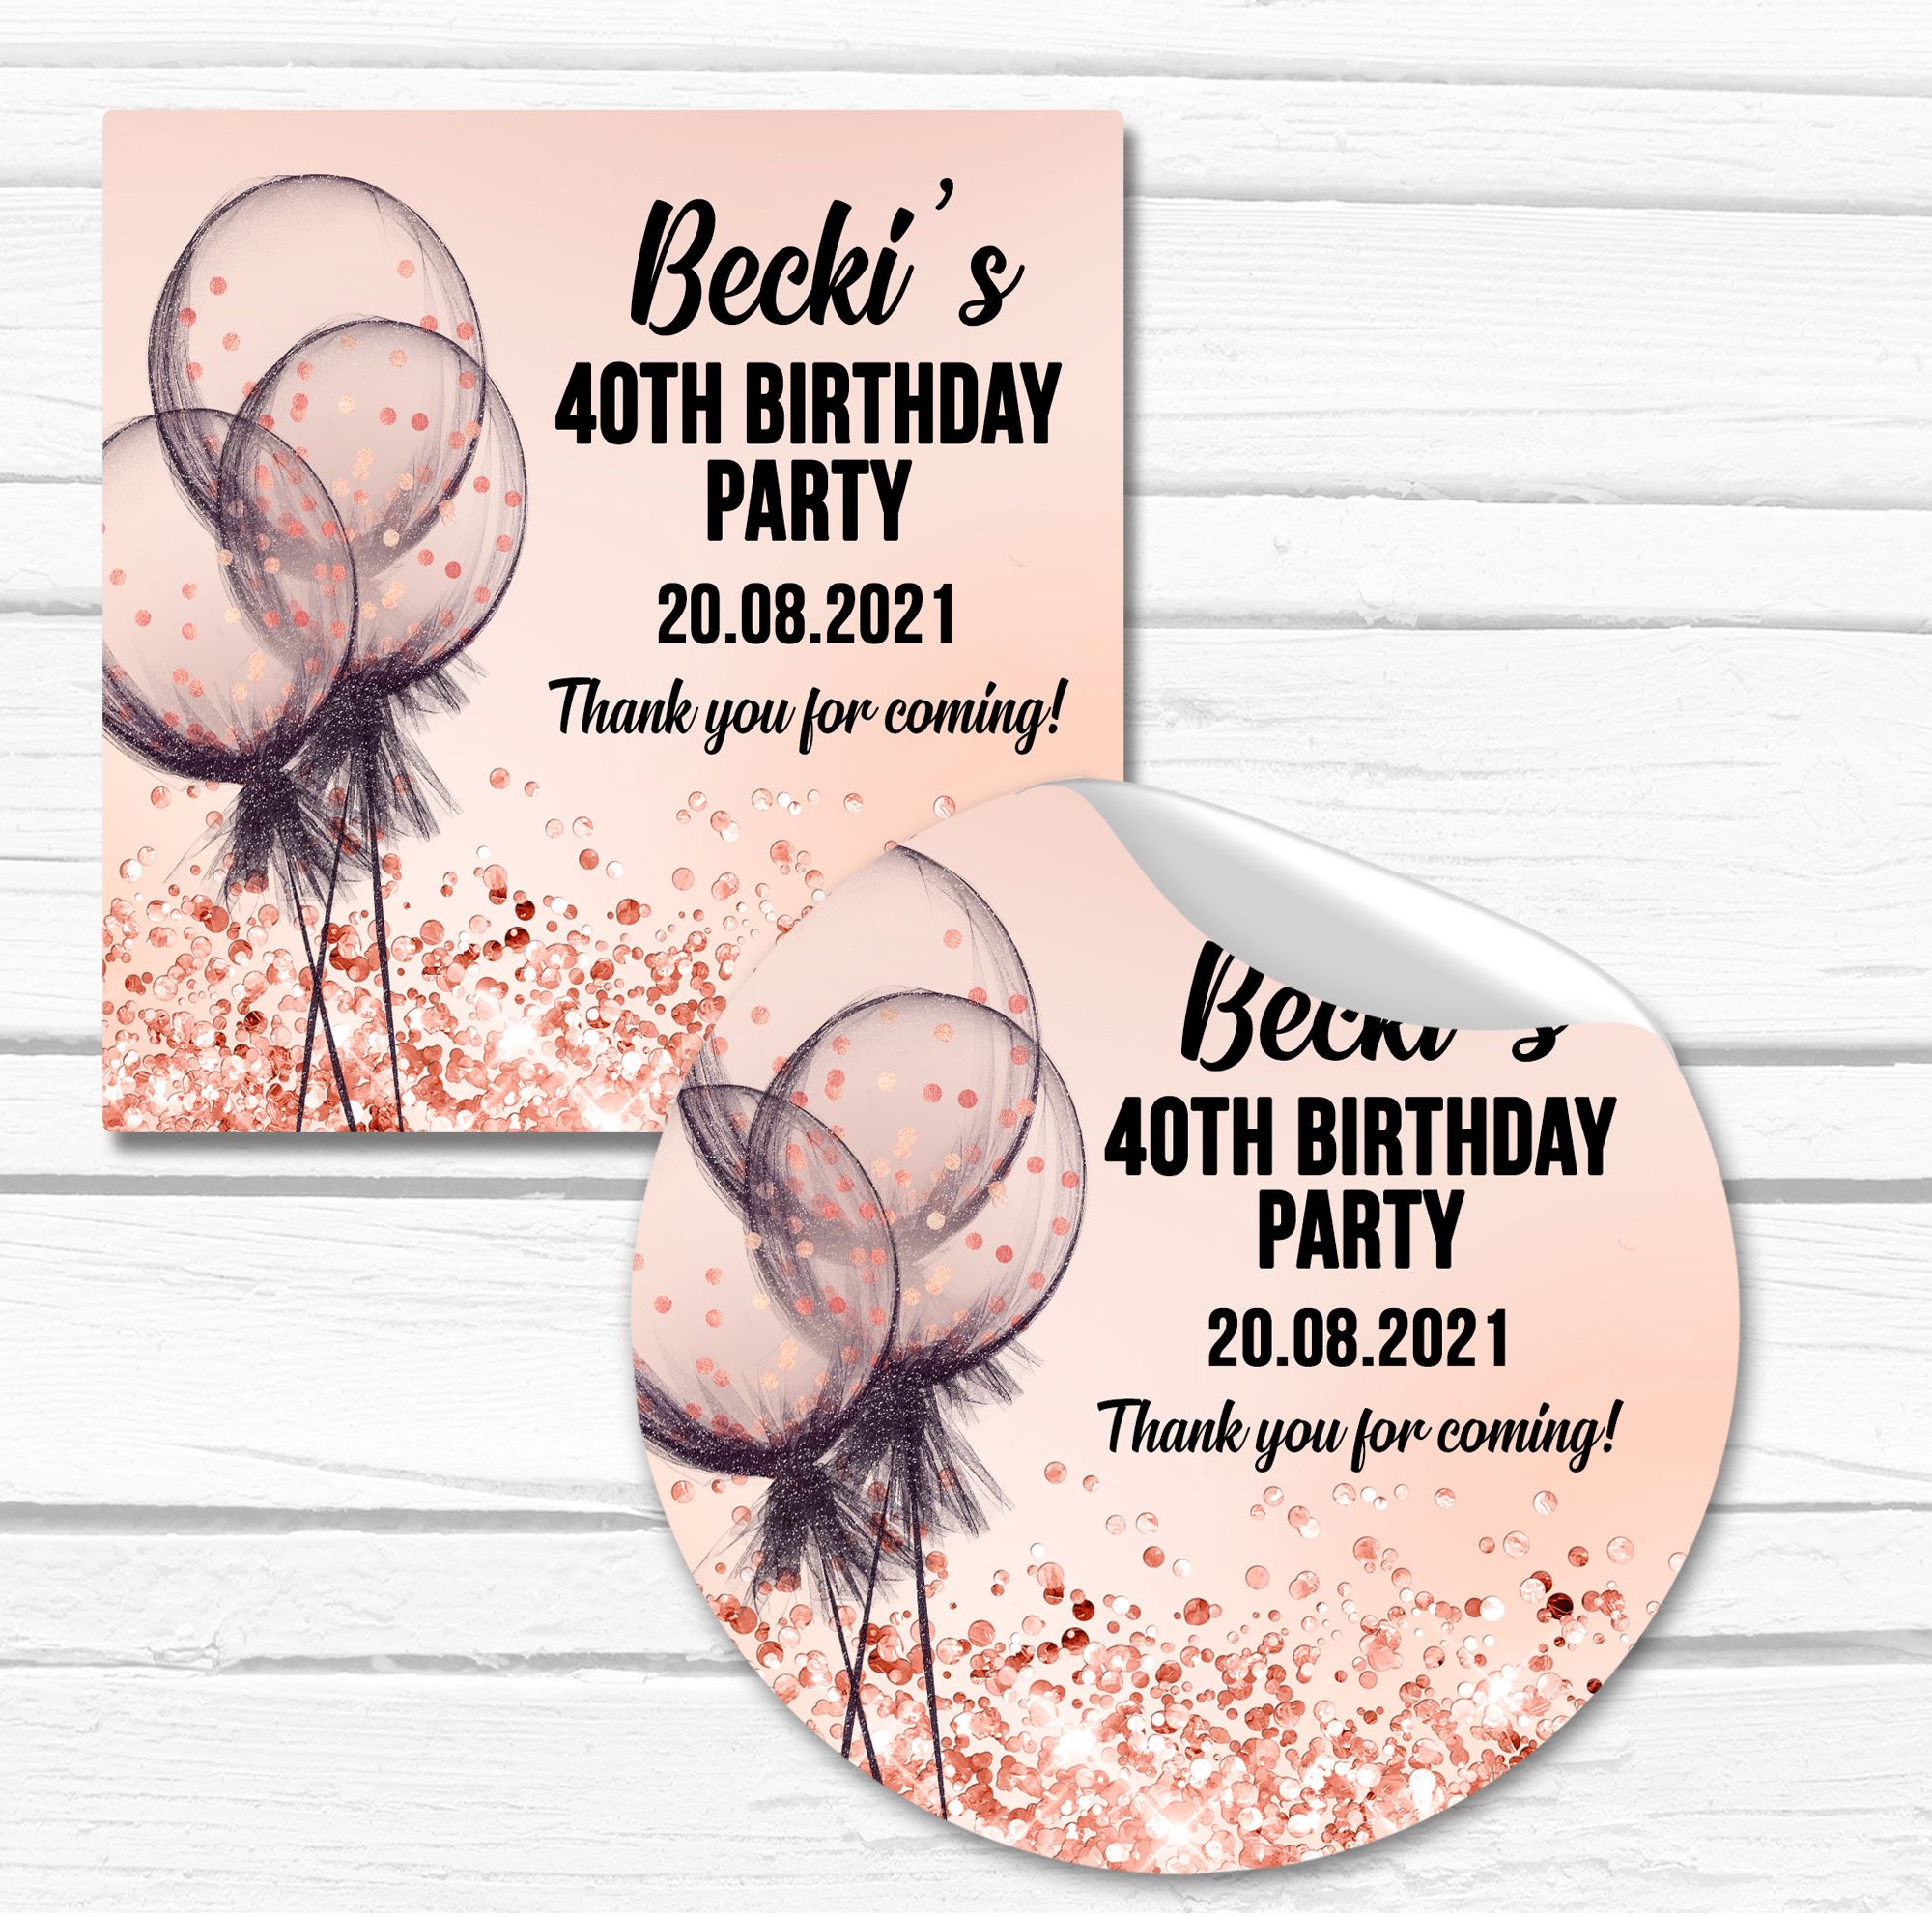 Birthday party stickers rose gold confetti balloons